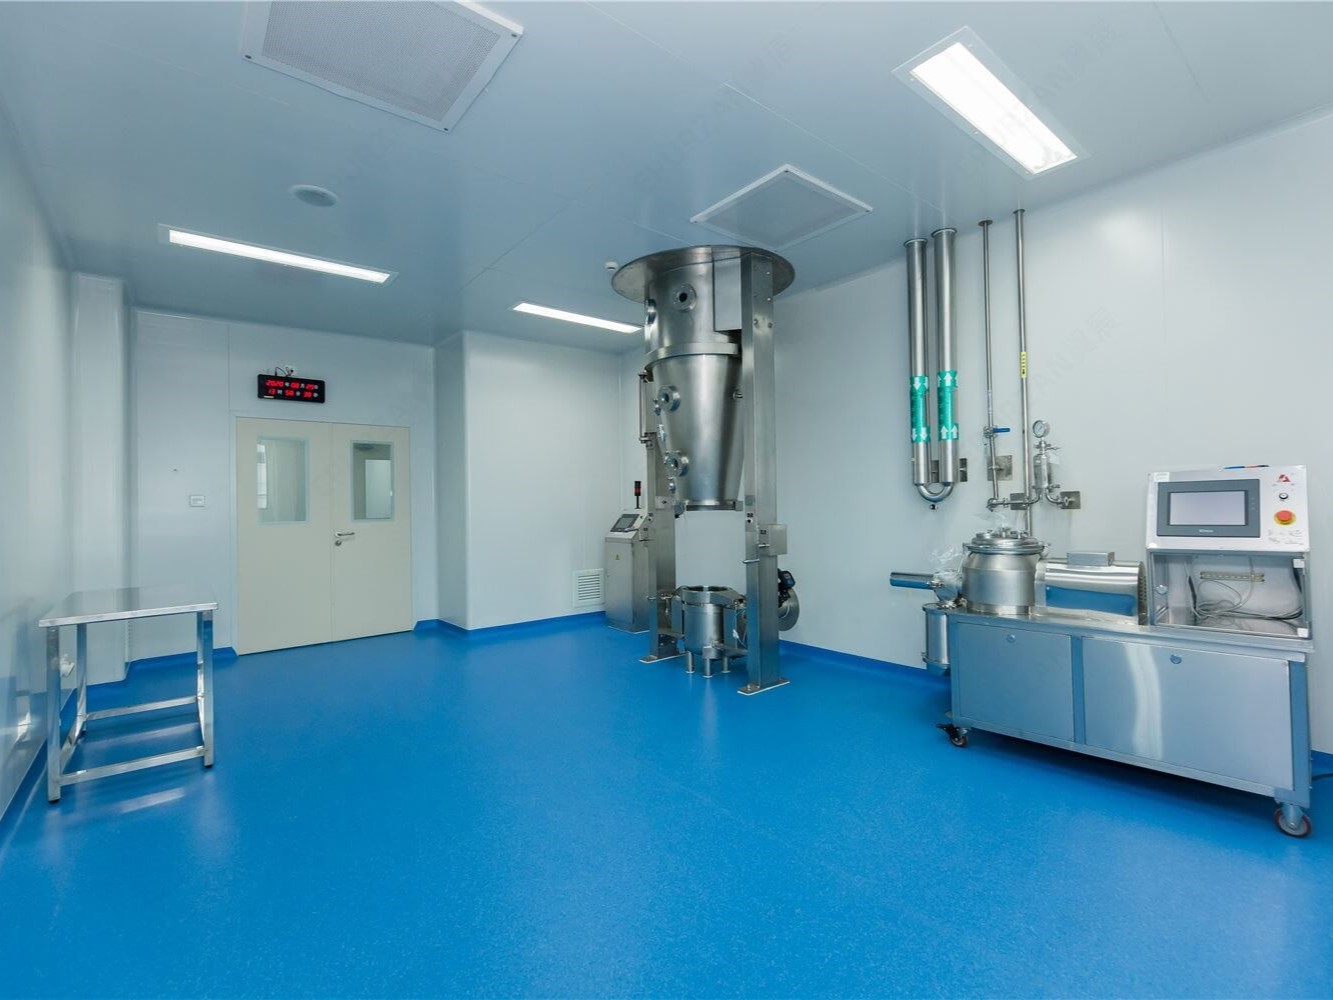 HOW IS POWER DISTRIBUTED IN CLEAN ROOM?